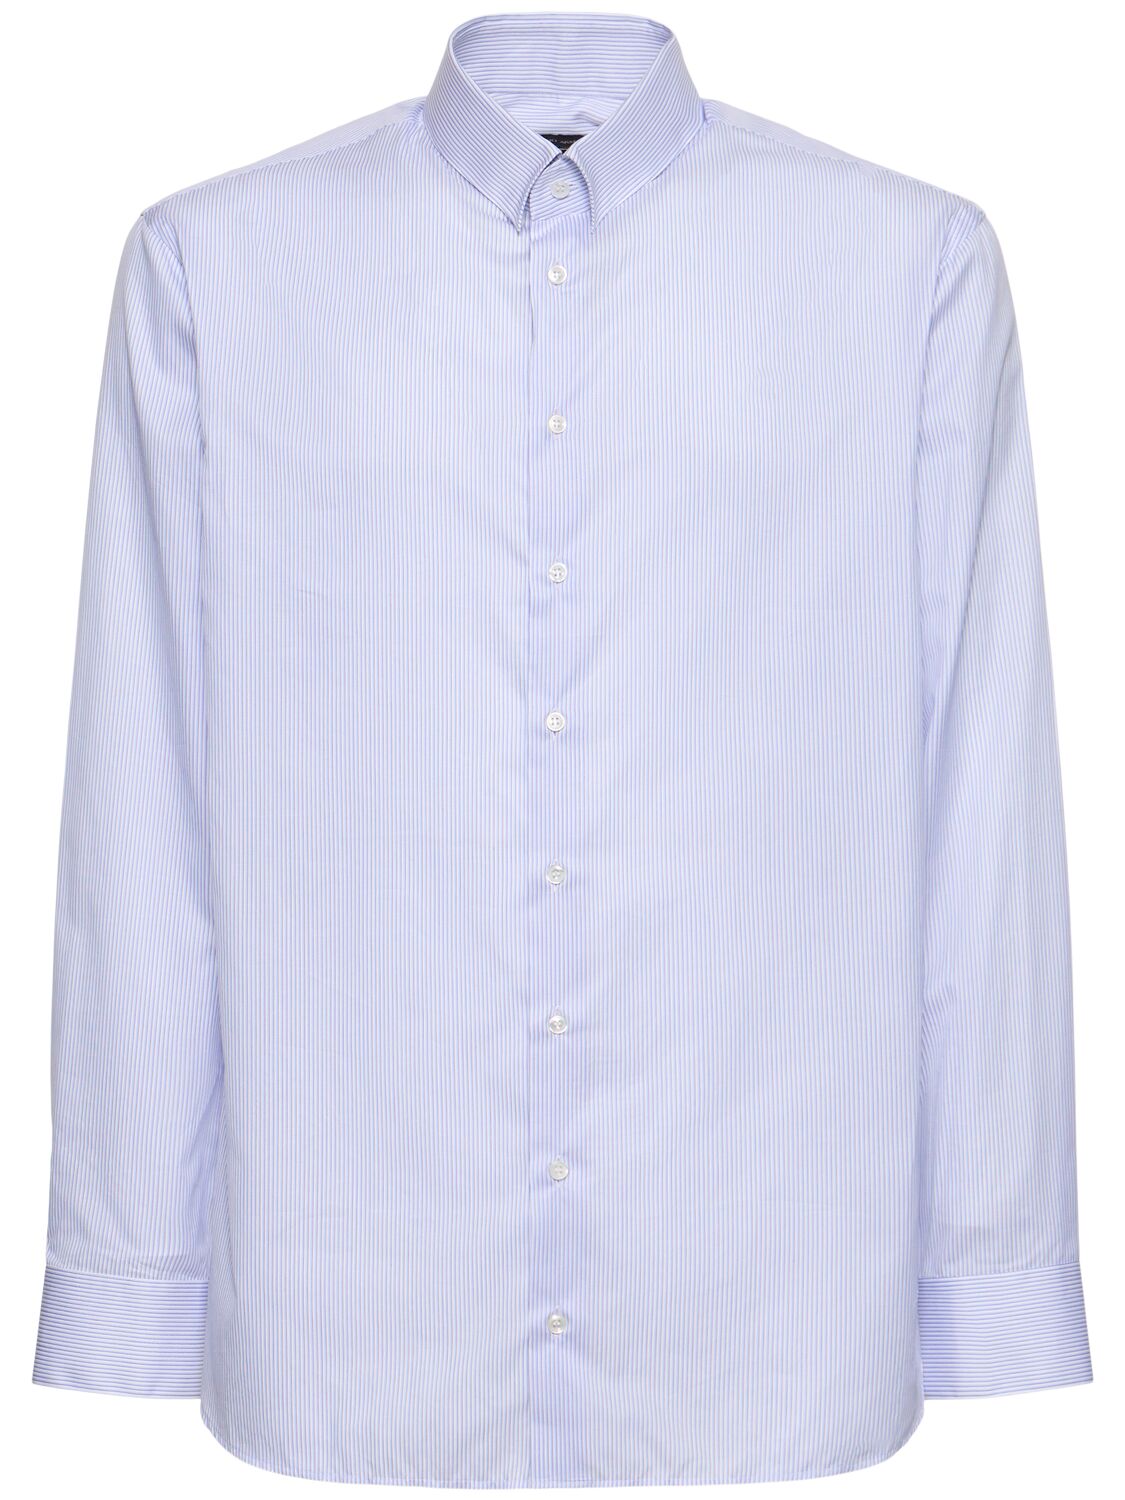 Image of Striped Cotton Shirt